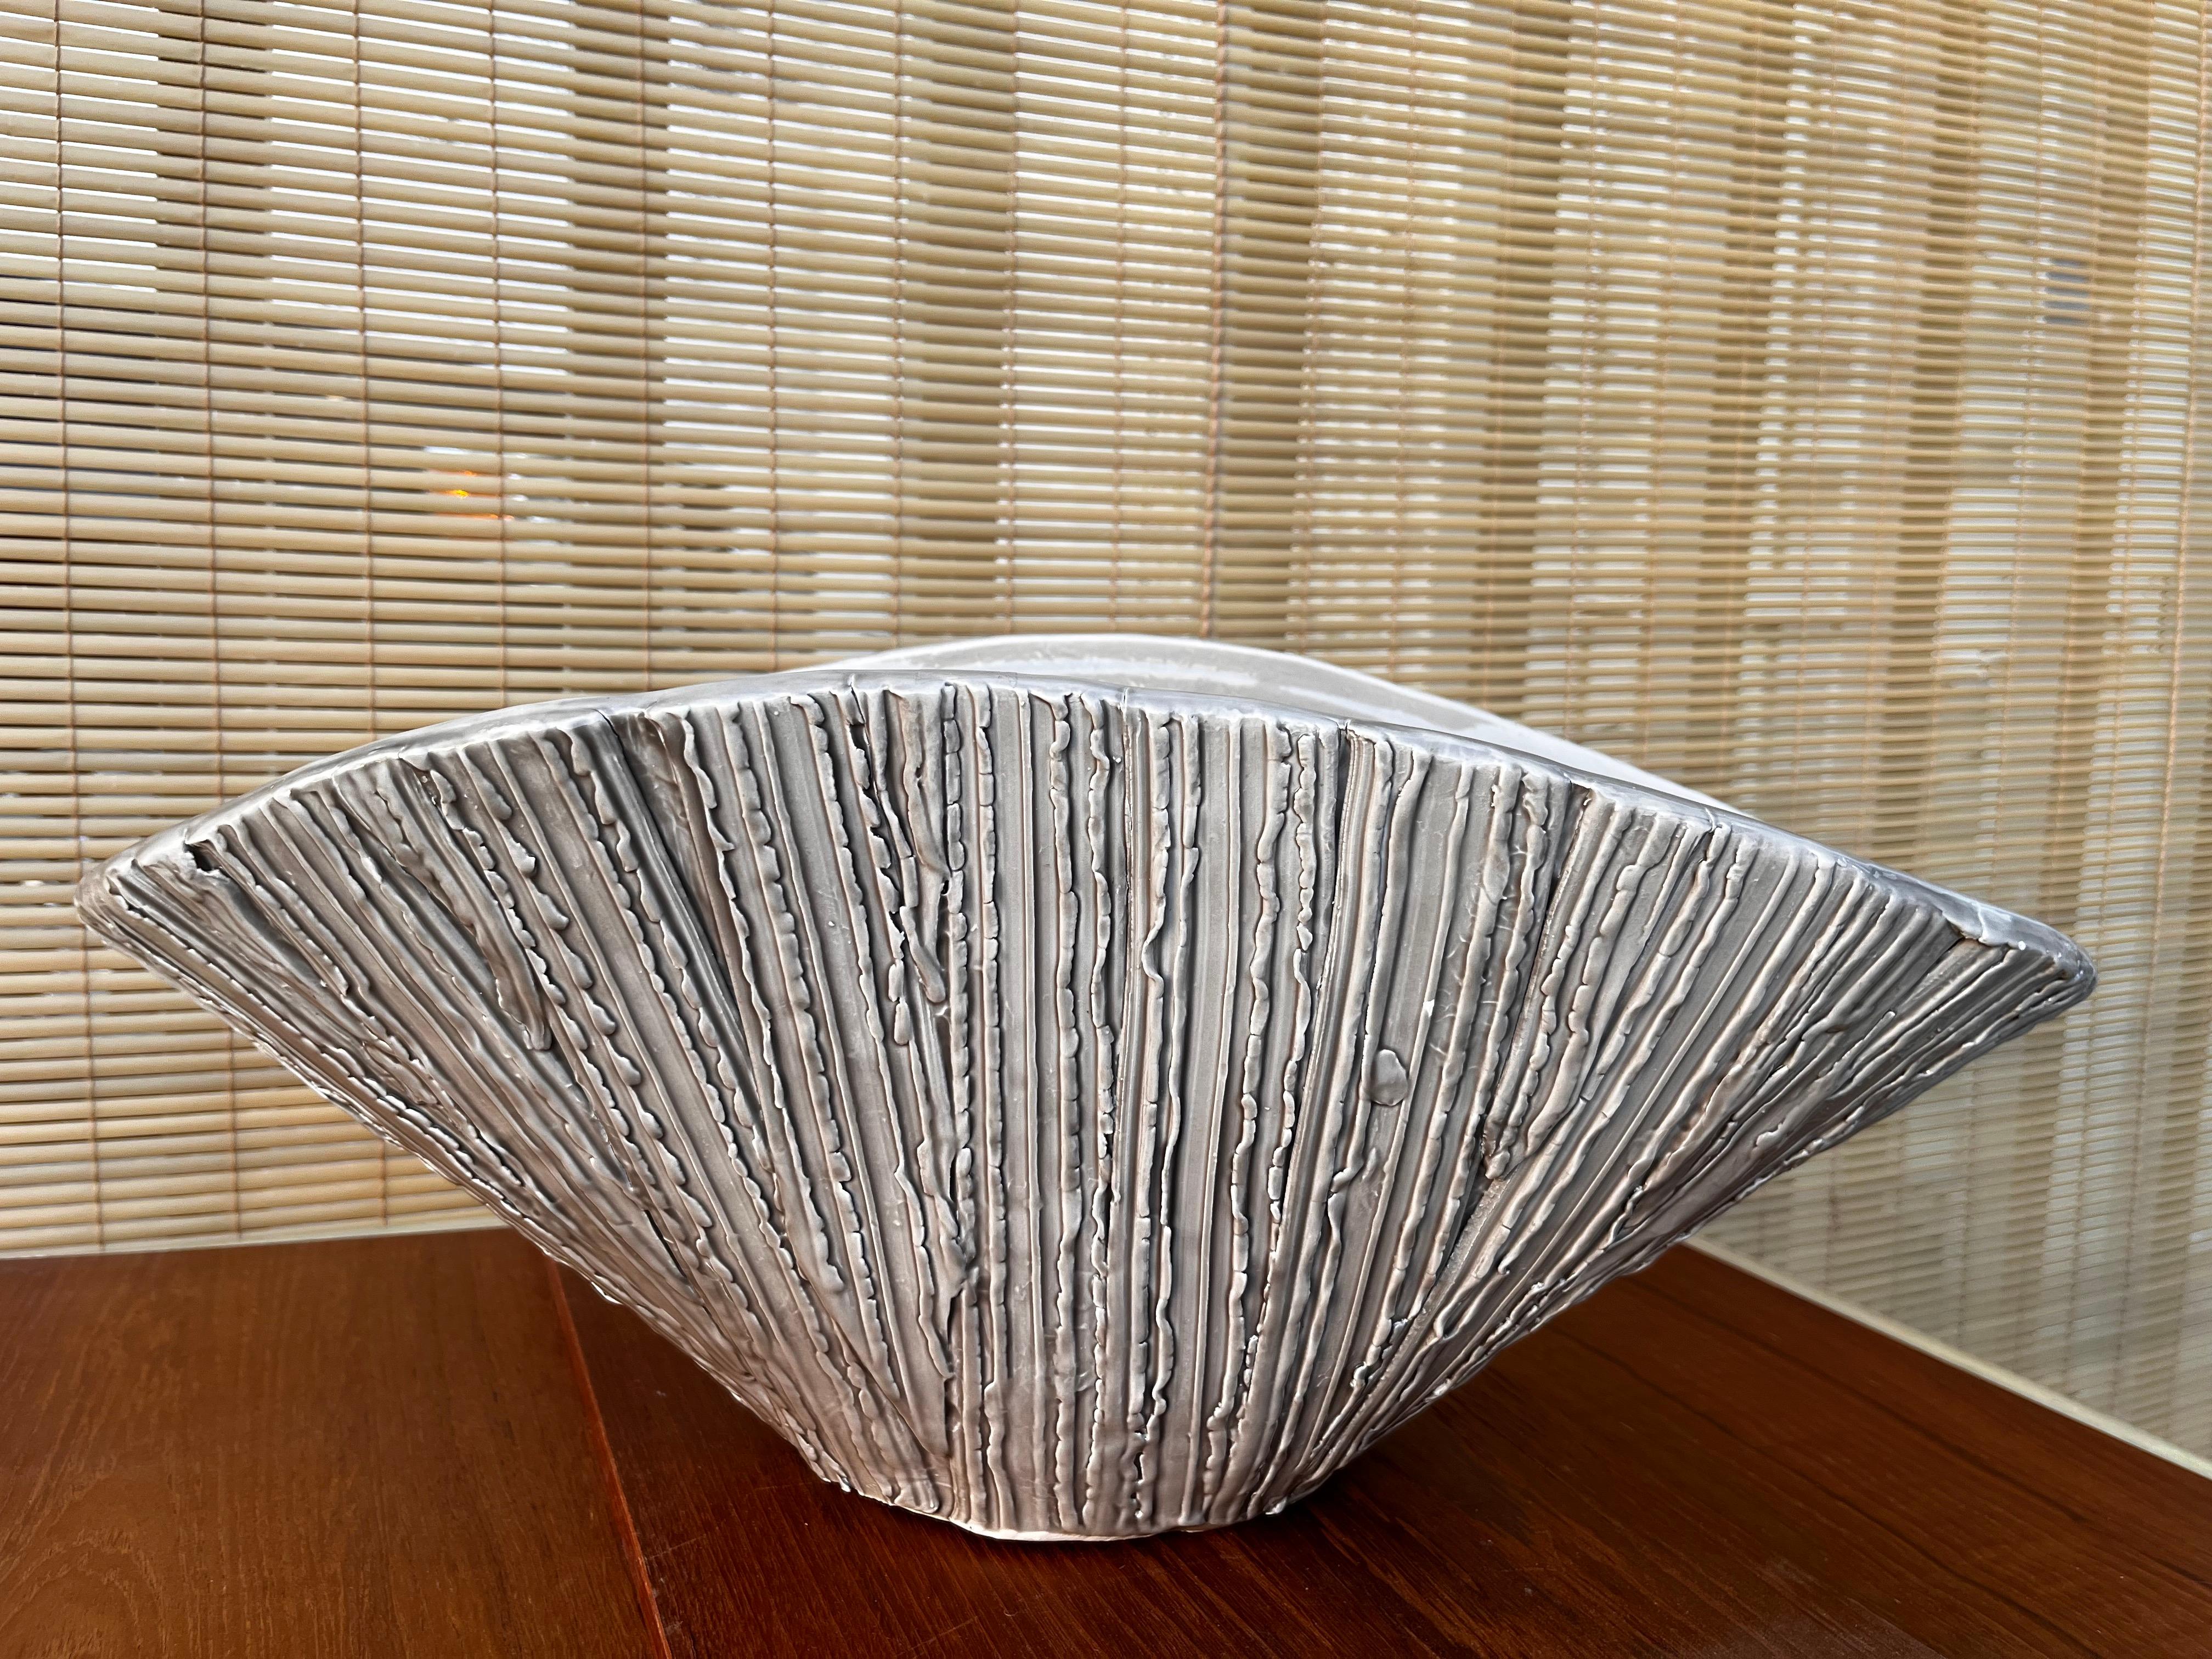 Contemporary Large Early 21st Century Textured Ceramic Bowl / Centerpiece by Abigails, Italy For Sale